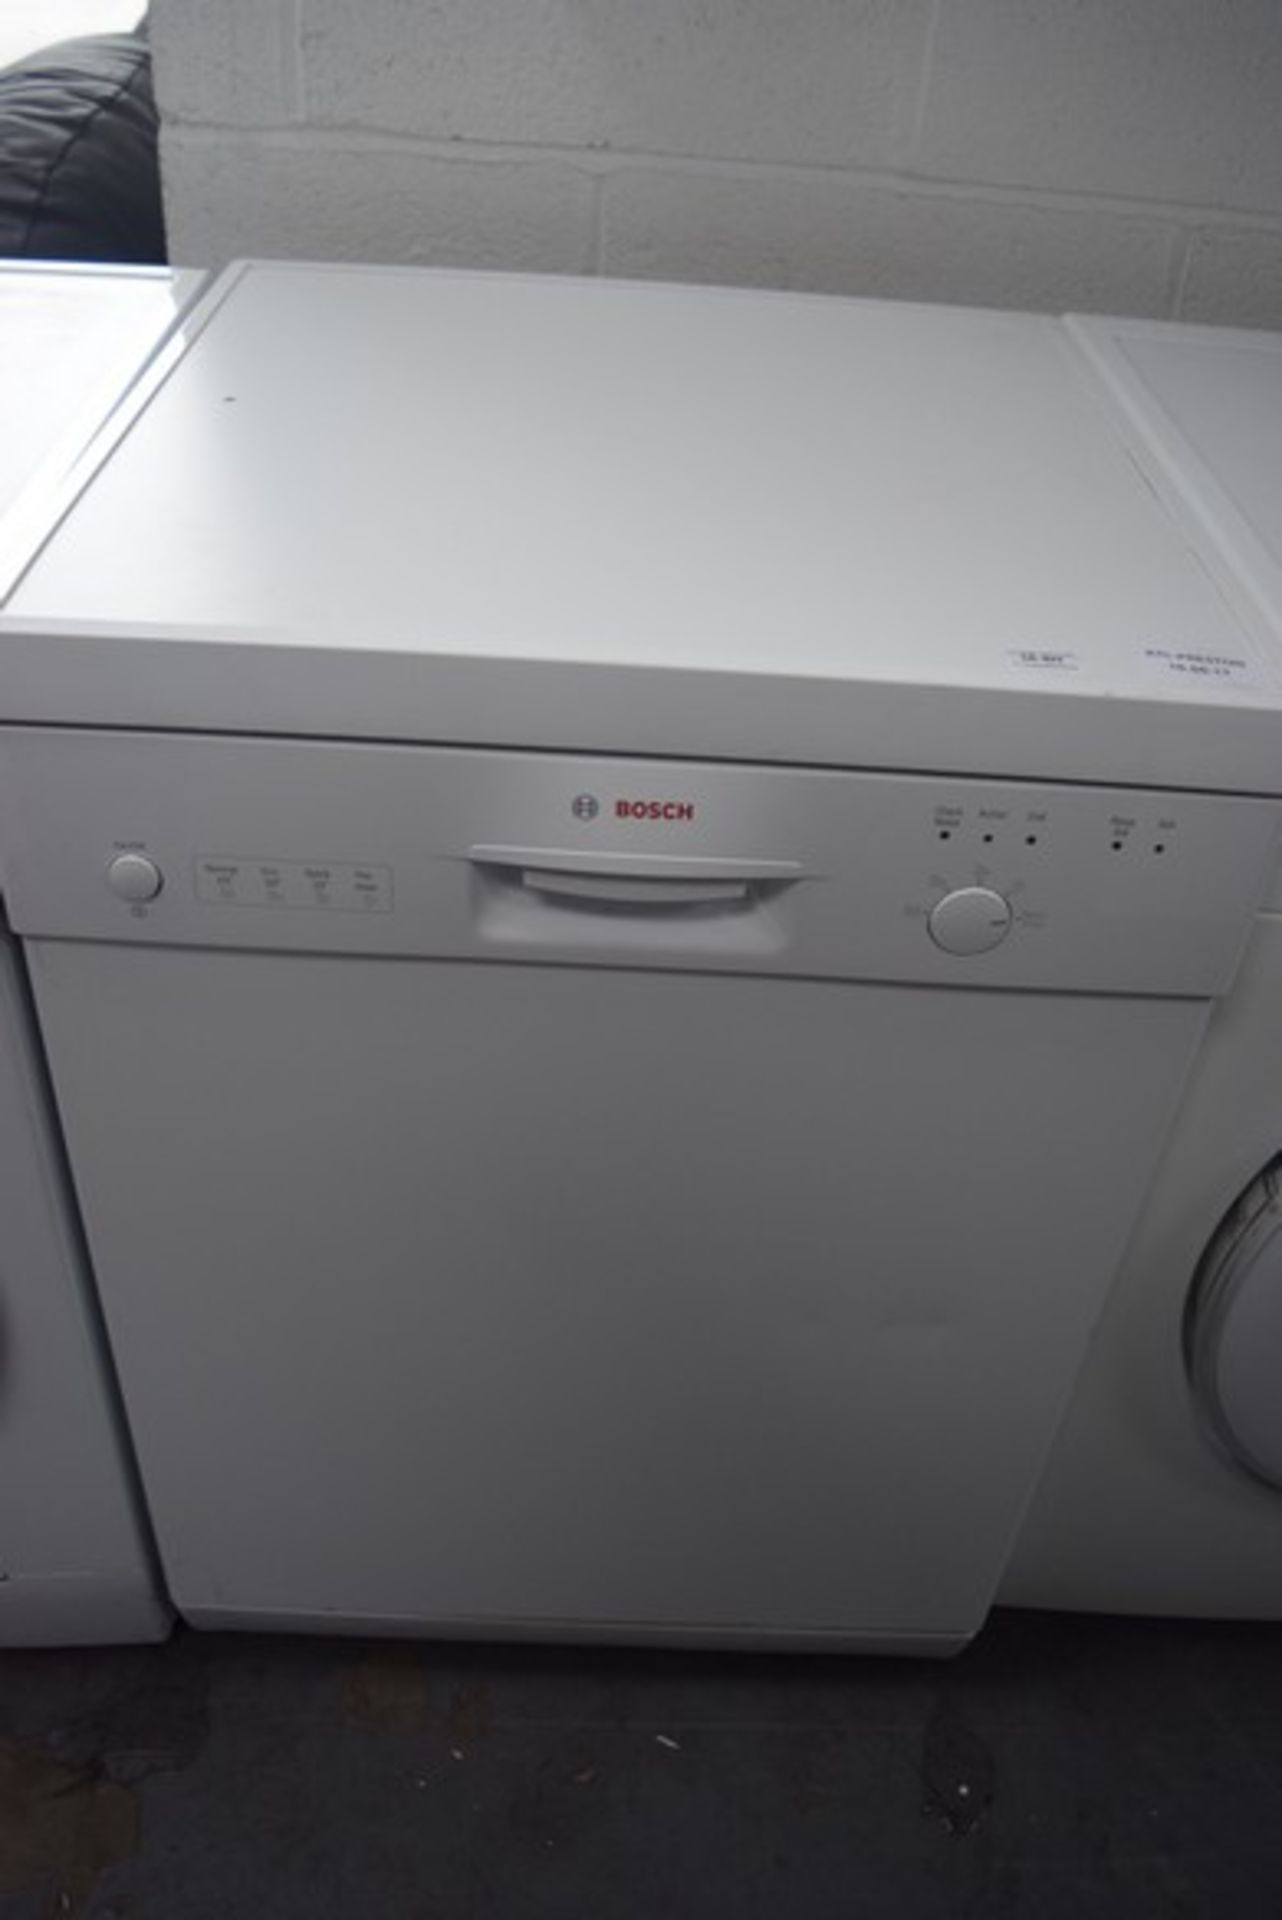 1 x BOSCH FREESTANDING DISHWASHER SMS50T2GB RRP £300 16/06/17 *PLEASE NOTE THAT THE BID PRICE IS